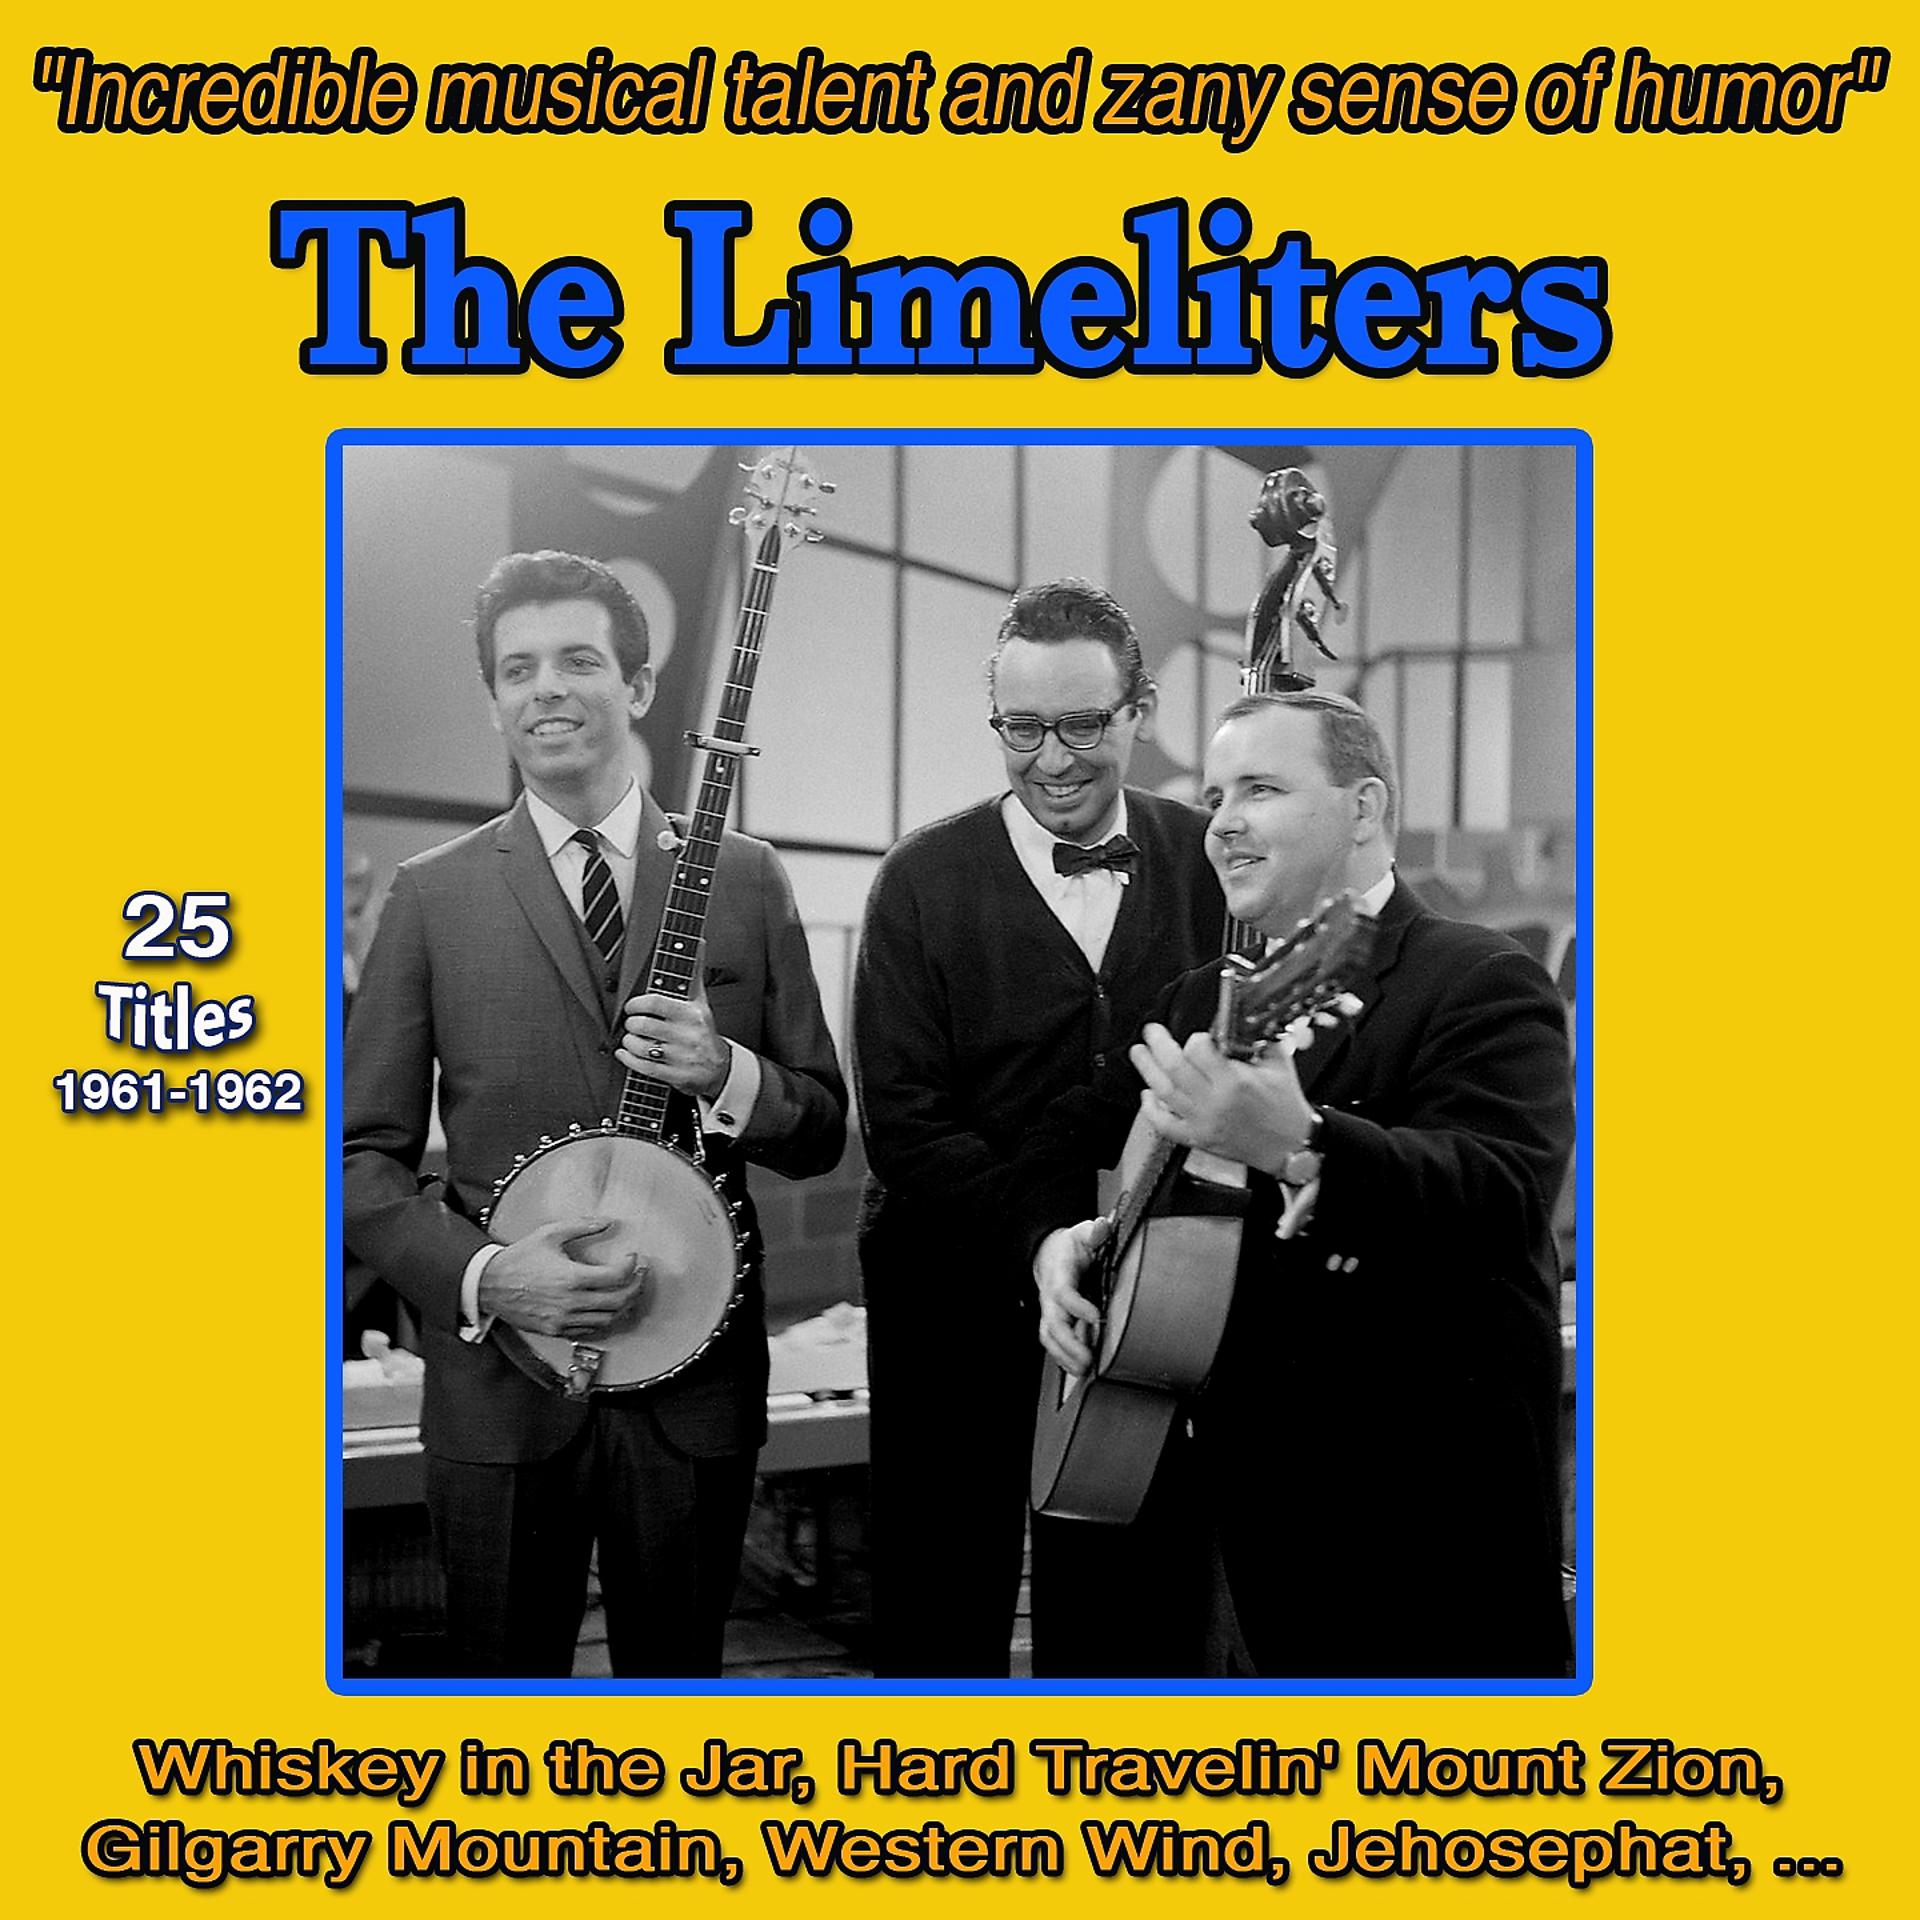 Постер альбома "Incredible Musical Talent and Zany Sense of Humor" - The Limeliters: Whiskey in the Jar